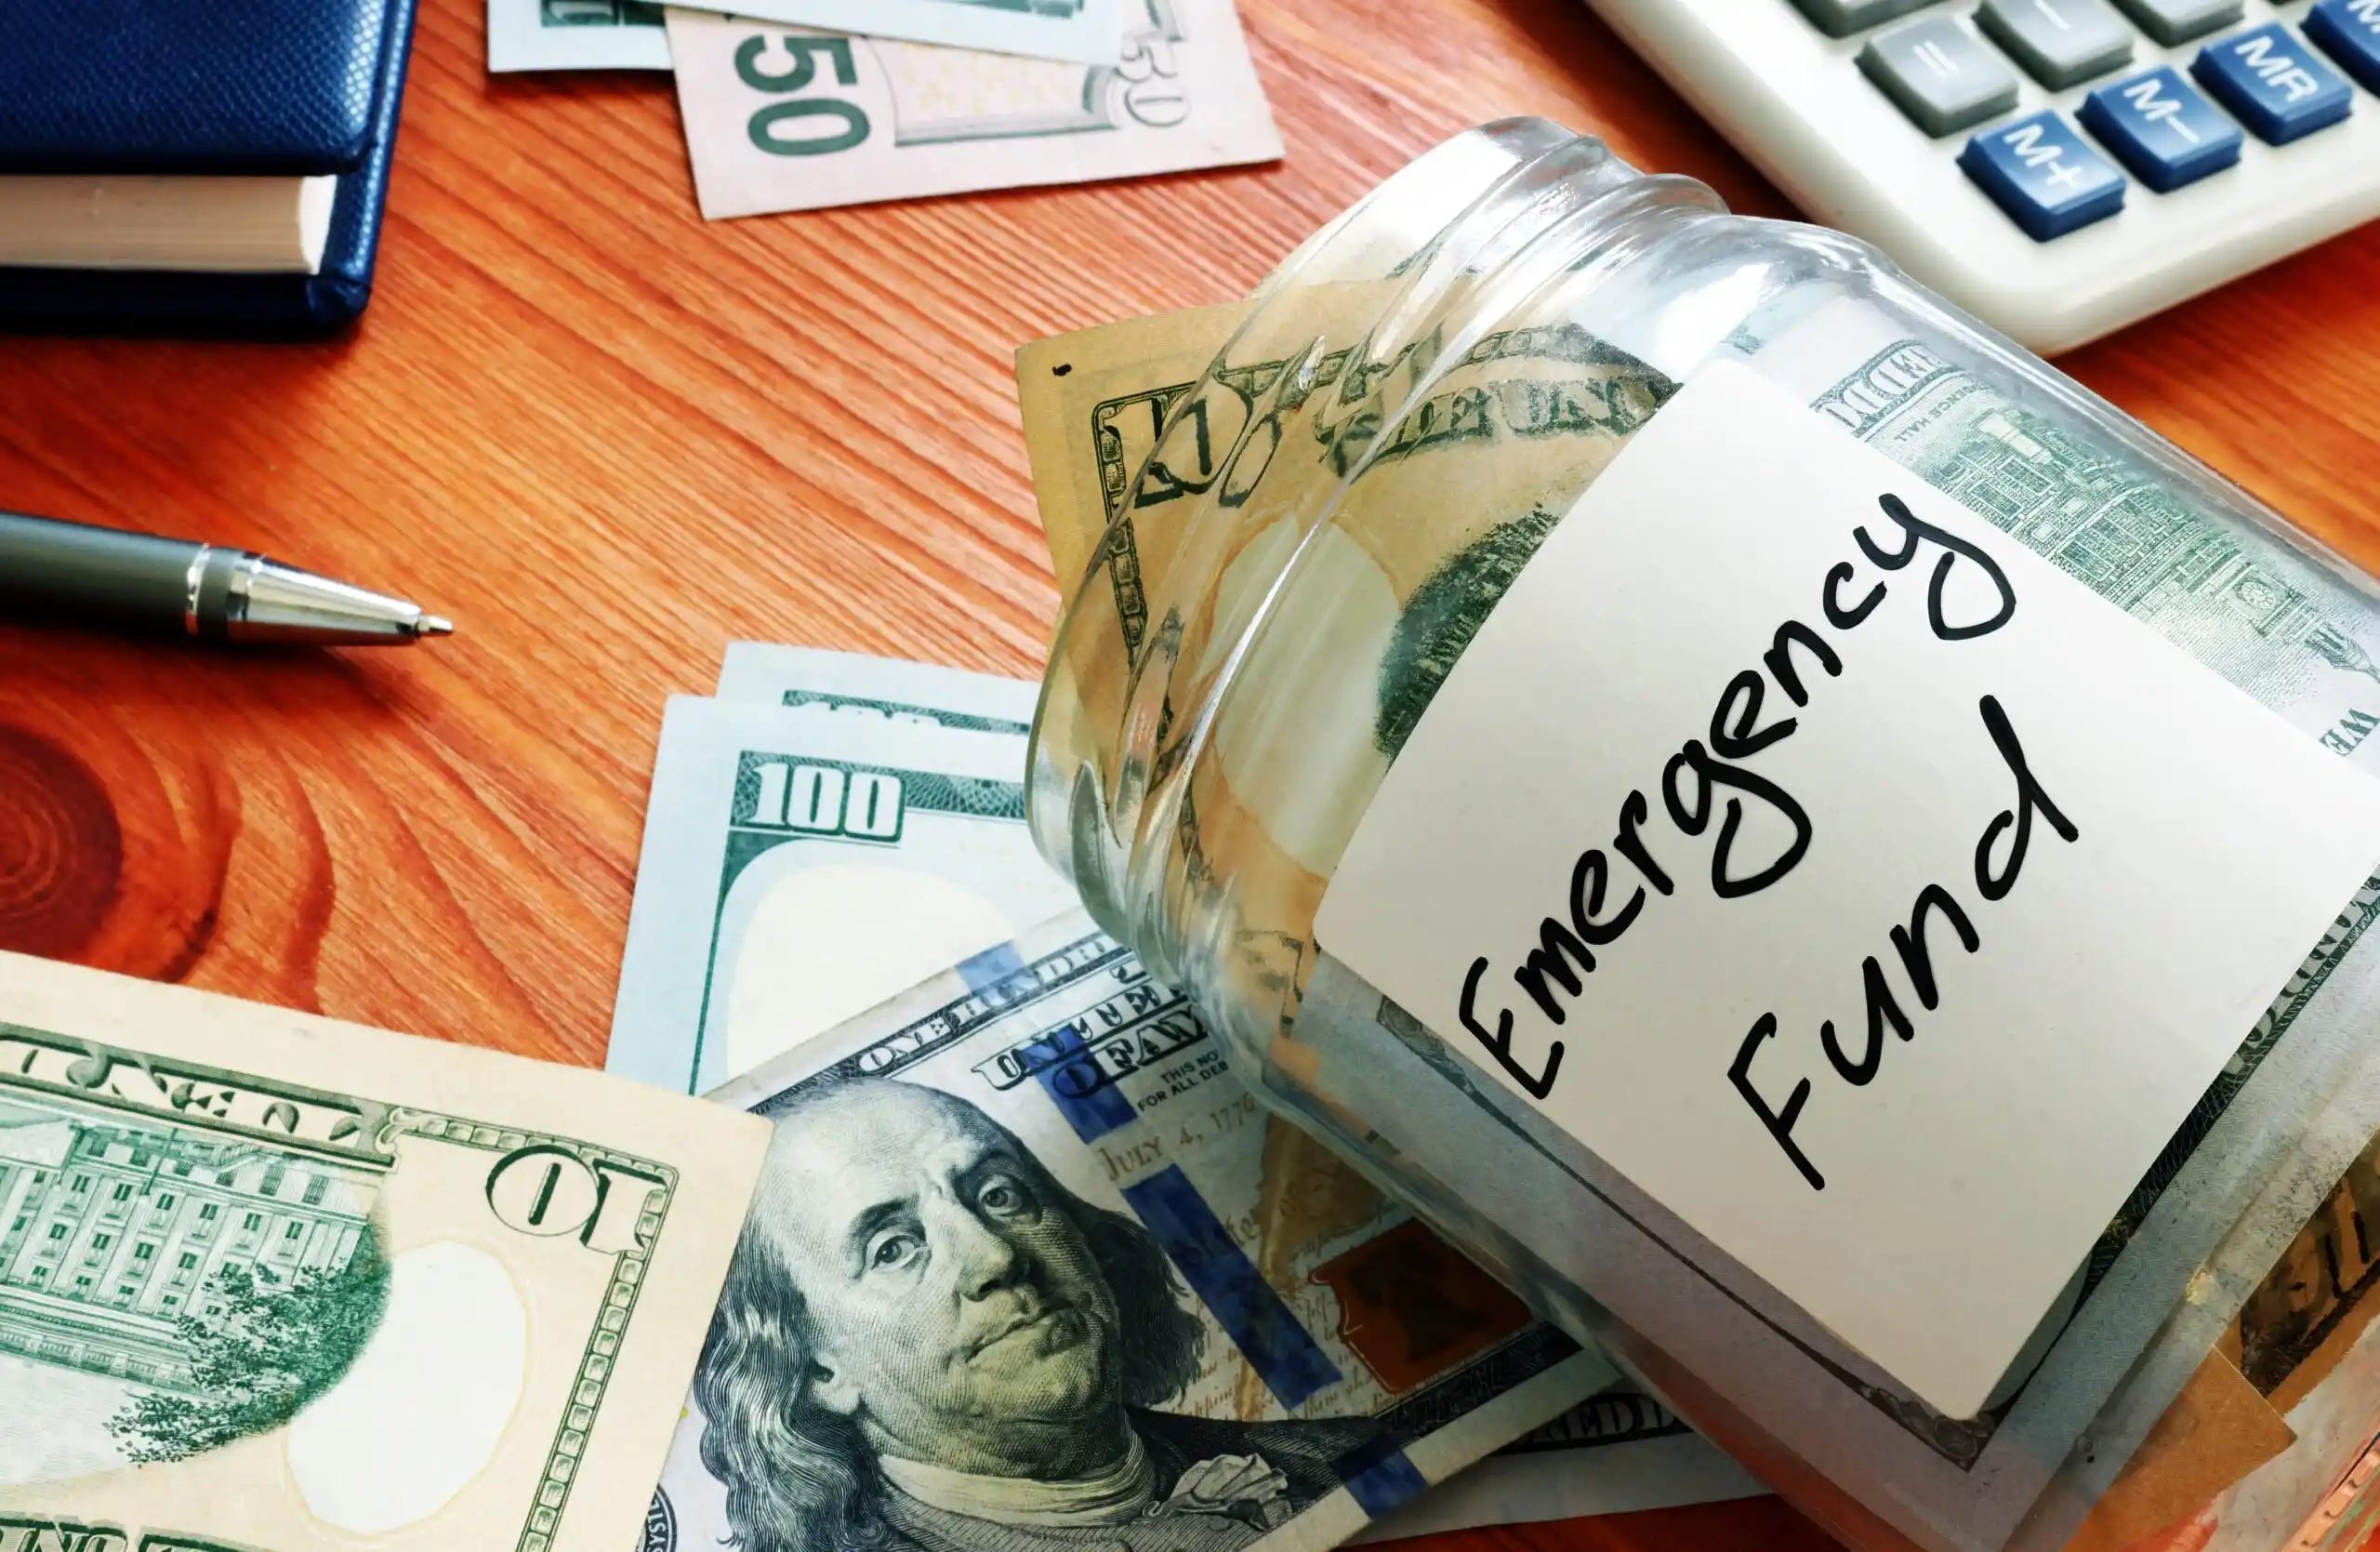 Emergency Fund vs. Available Credit: What Does Financial Security Really Mean?